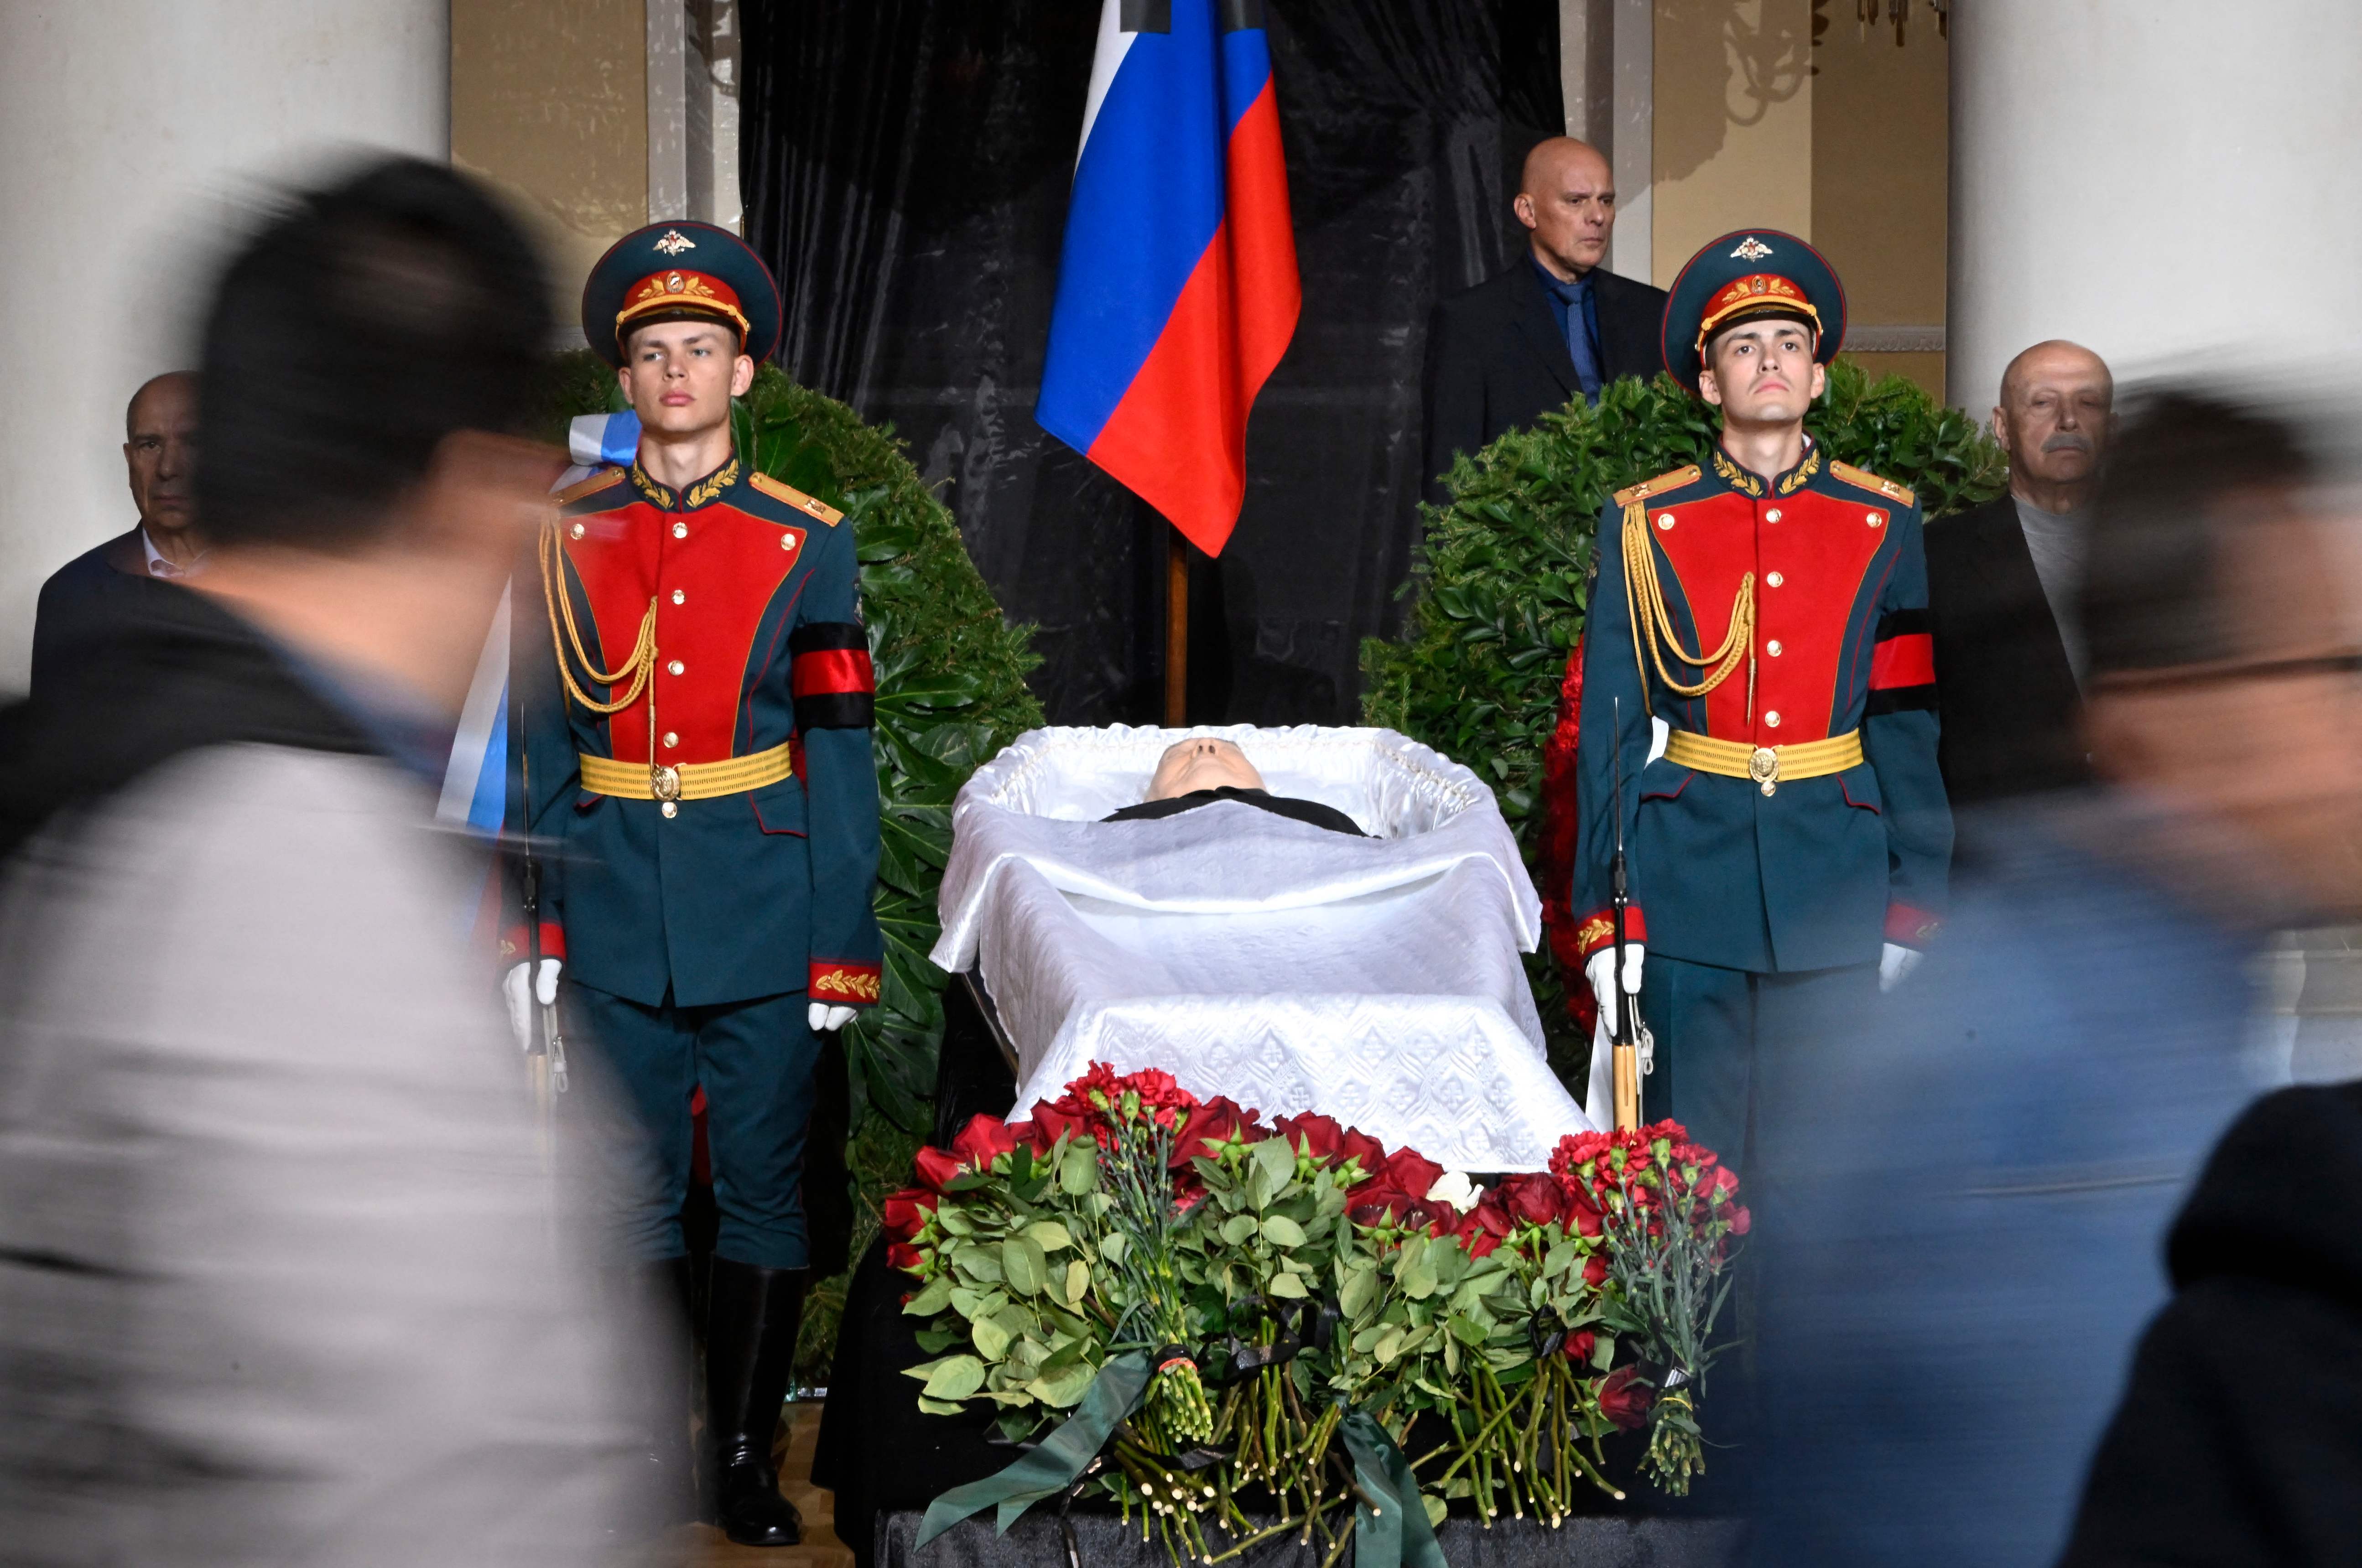 Guards stand by the coffin of the former Soviet leader